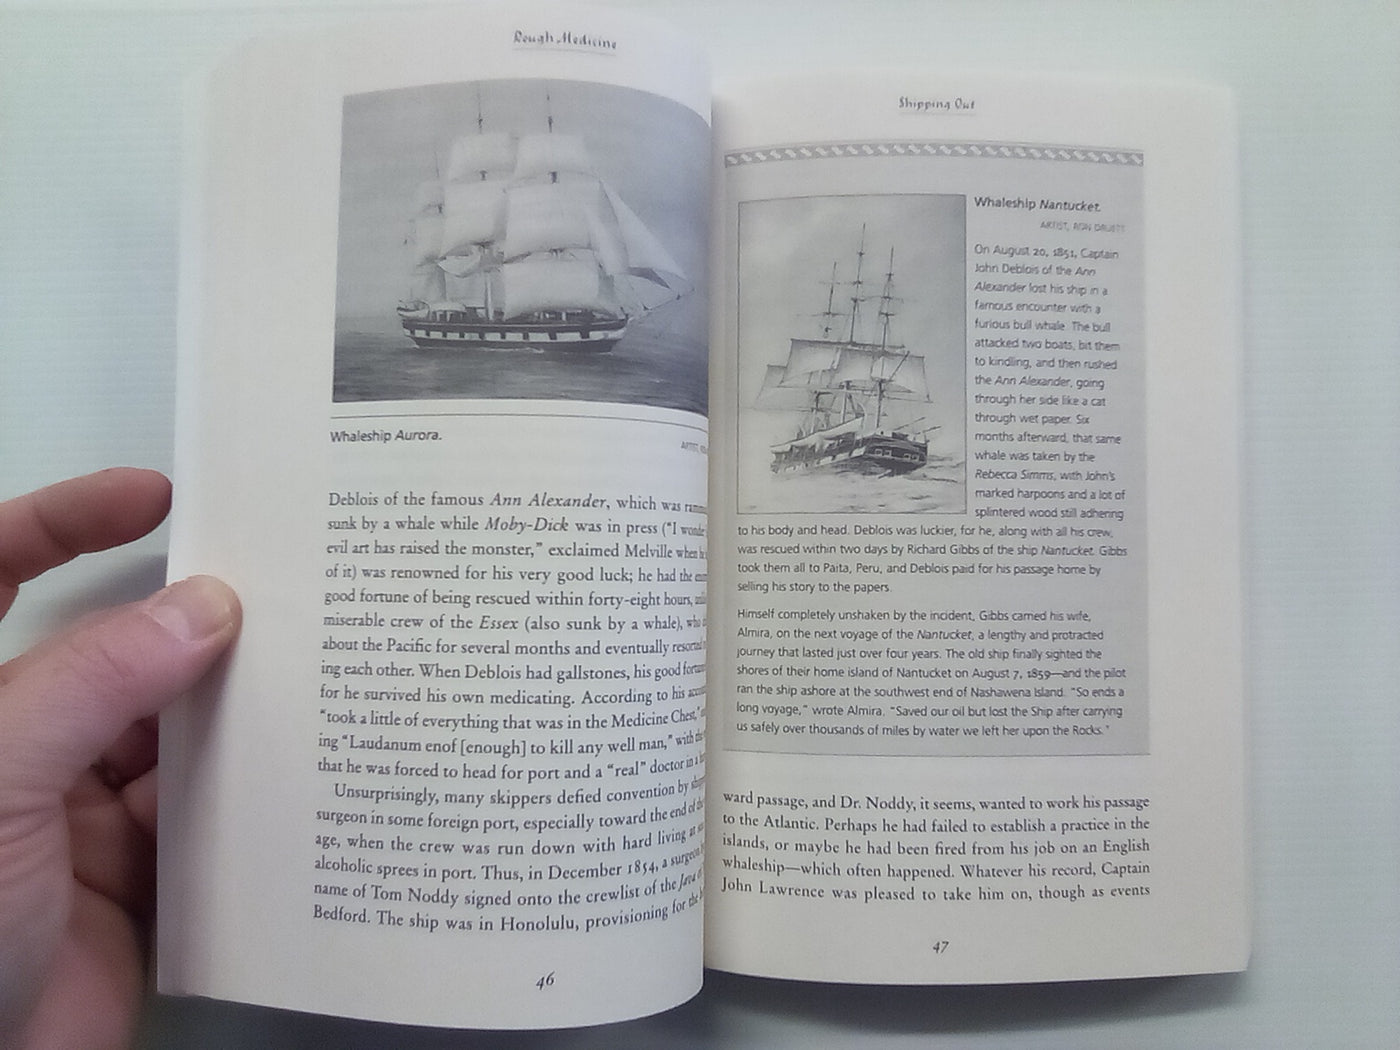 Rough Medicine - Surgeons at Sea in the Age of Sail by Joan Druett